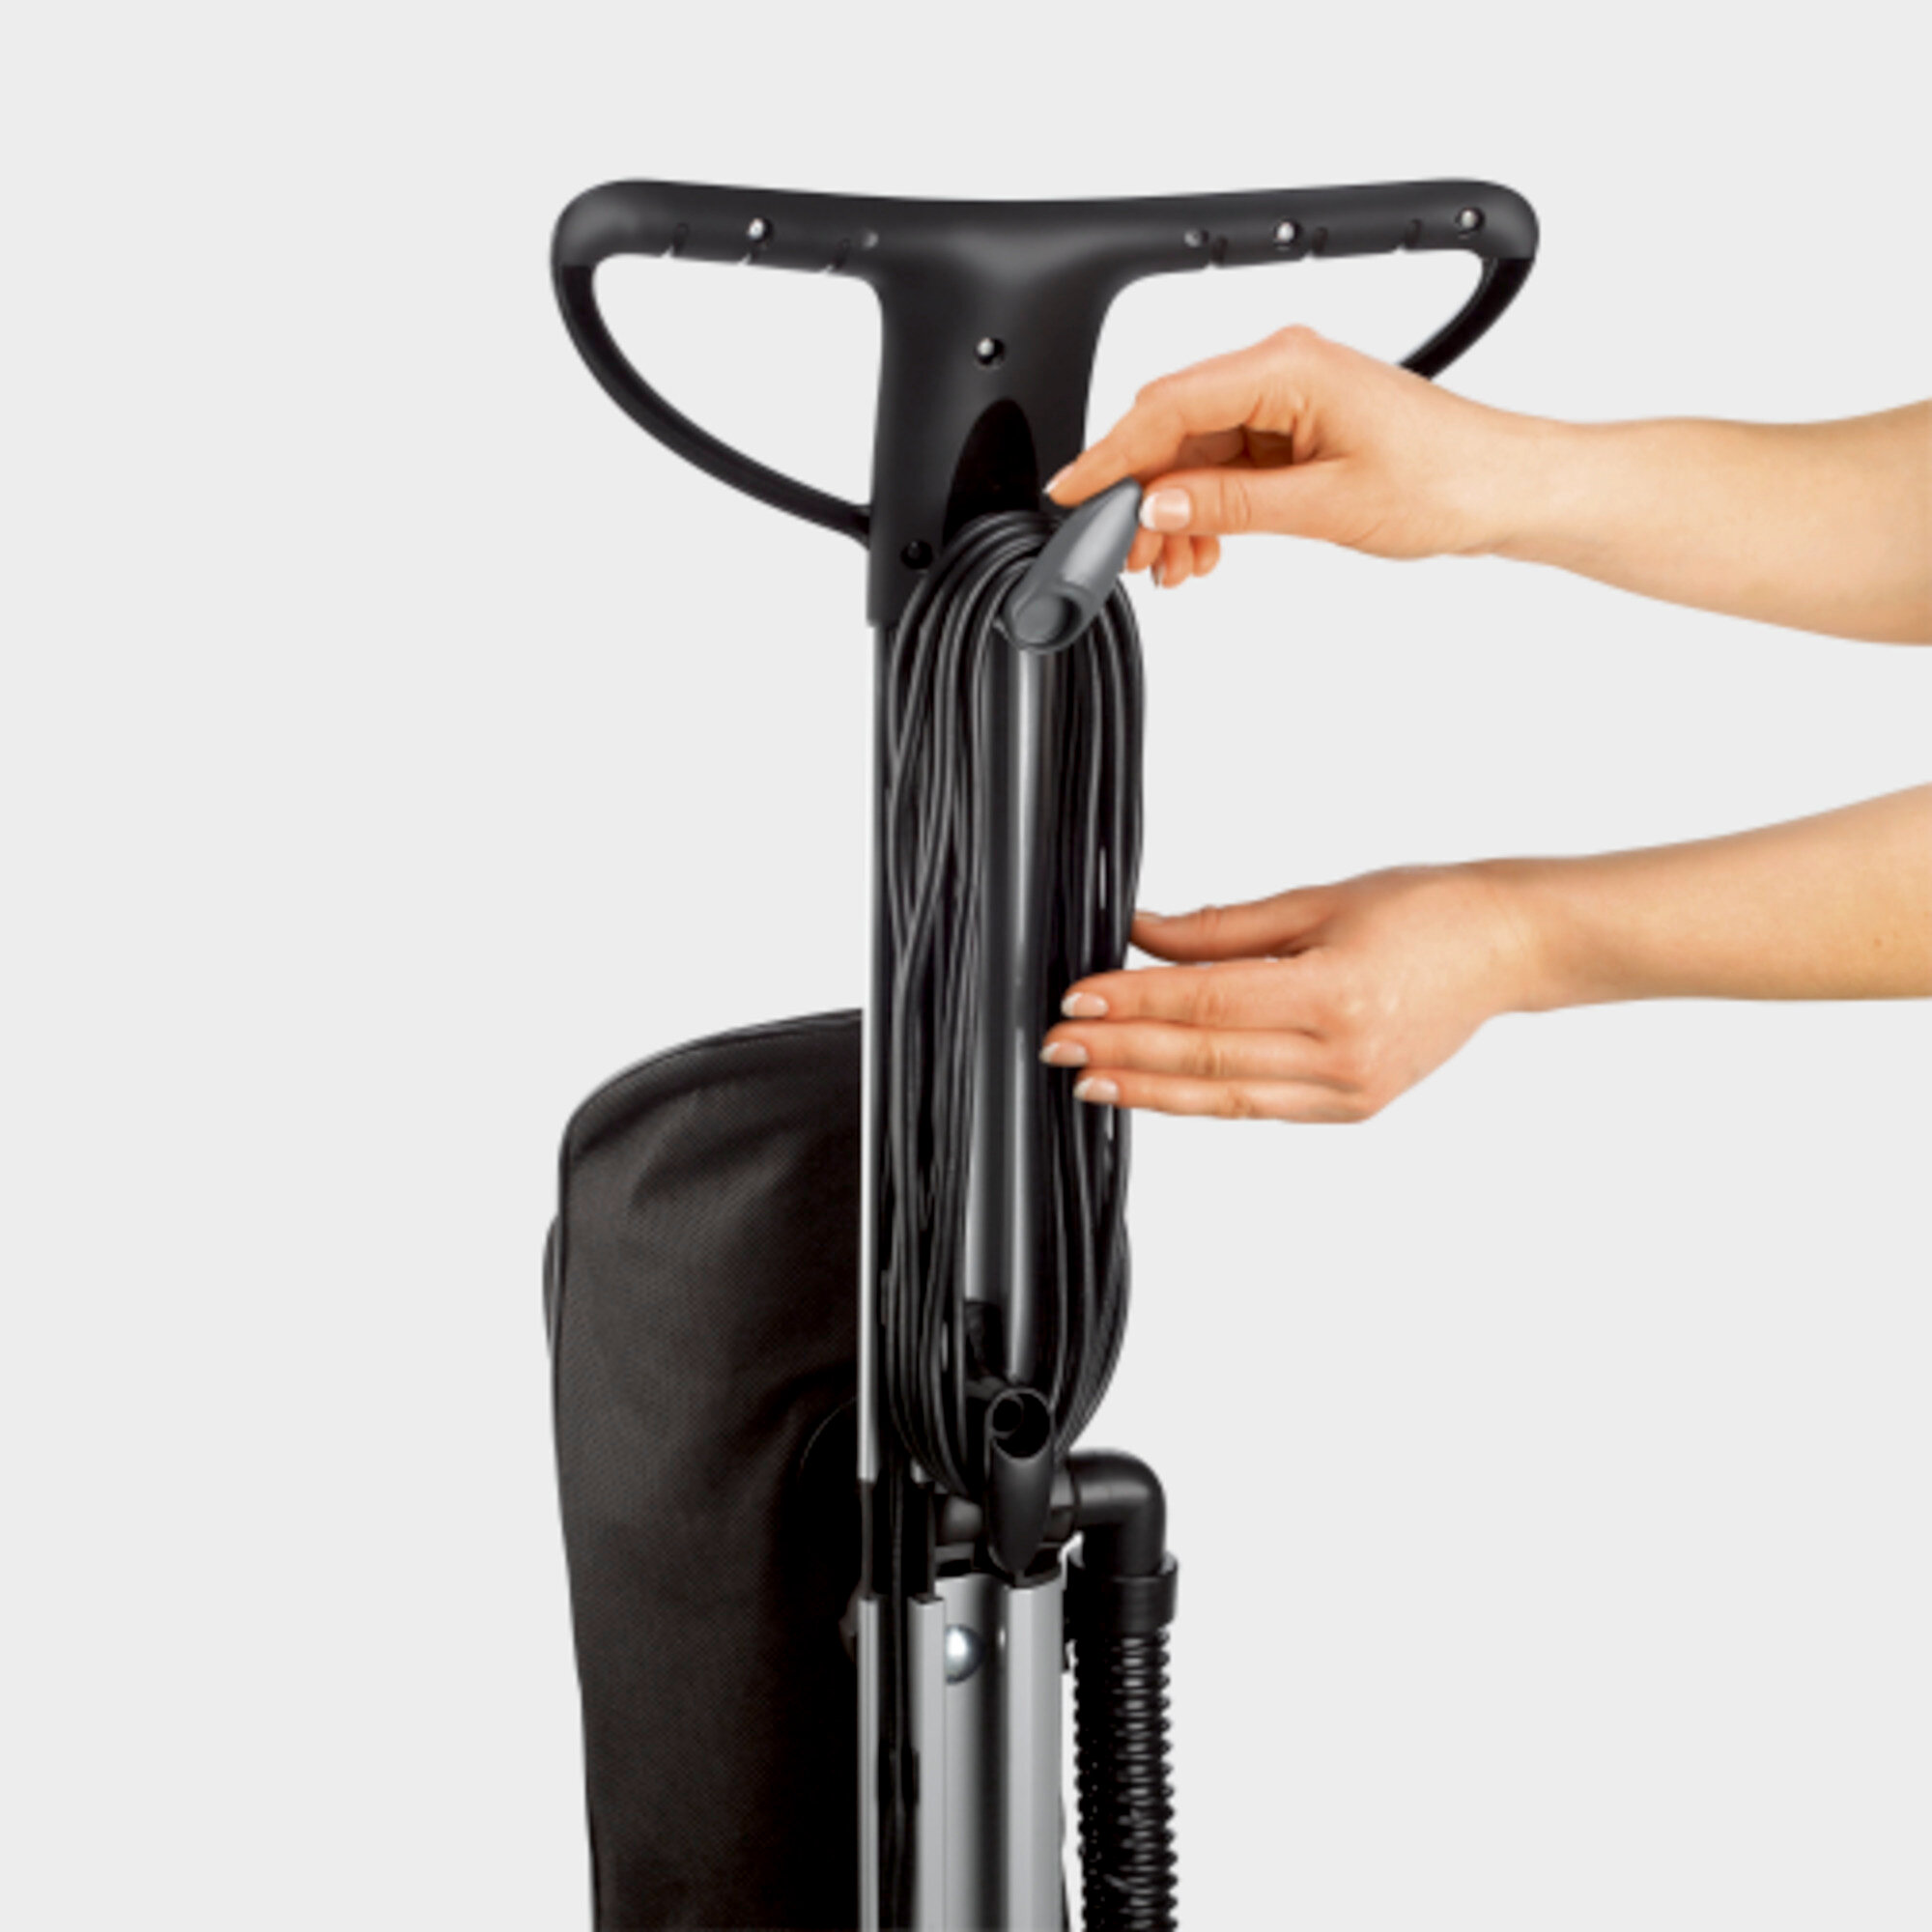 Floor polisher FP 303: Cord storage directly on the handle